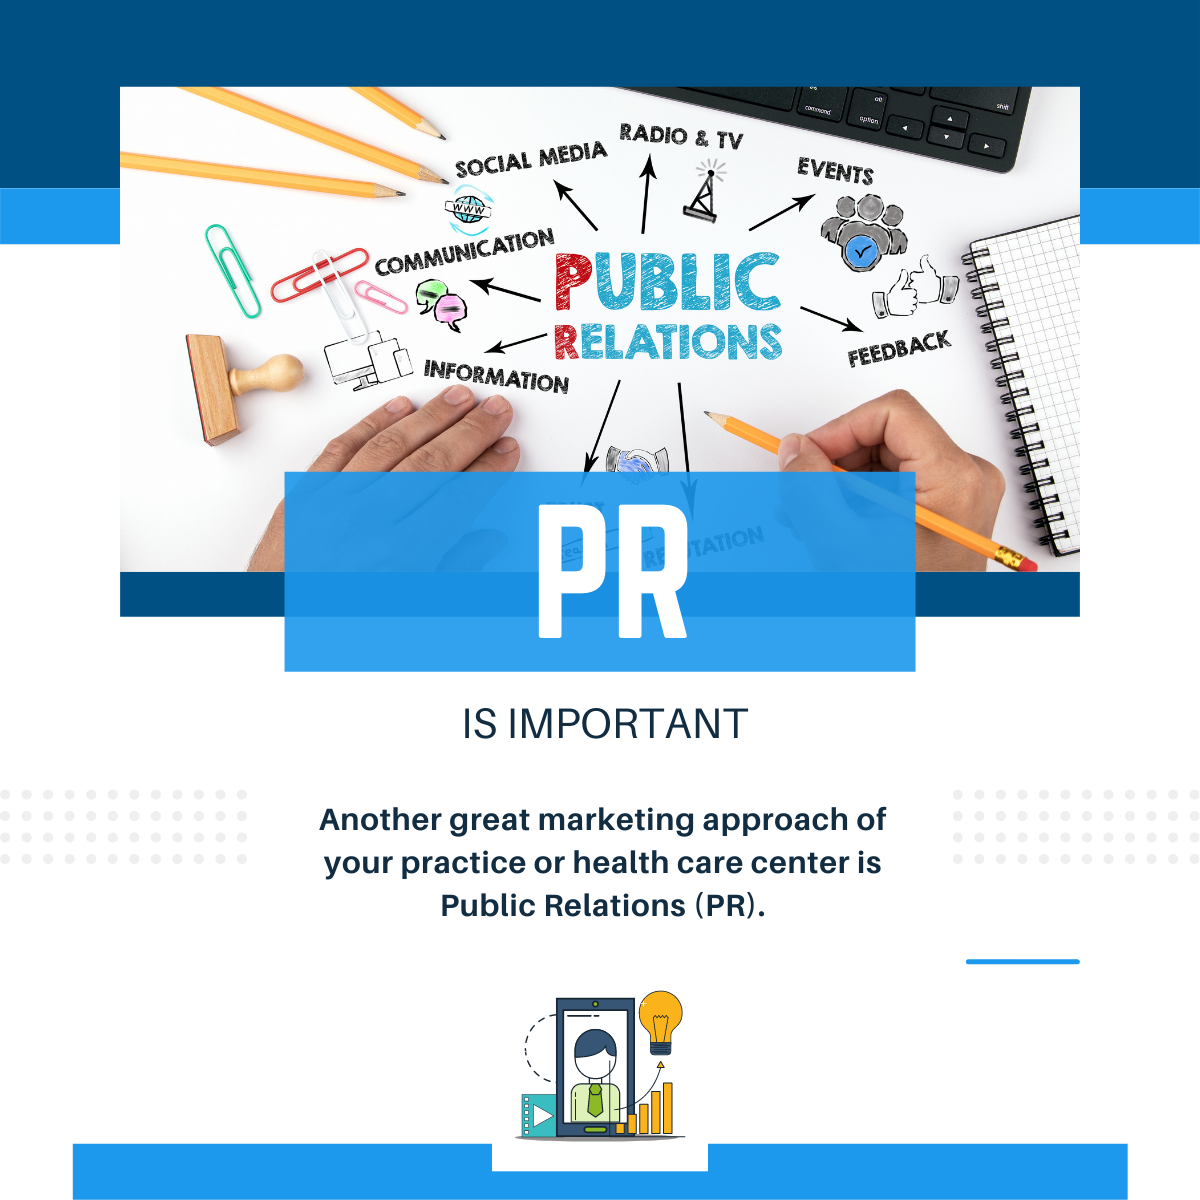 Public Relations or PR is important